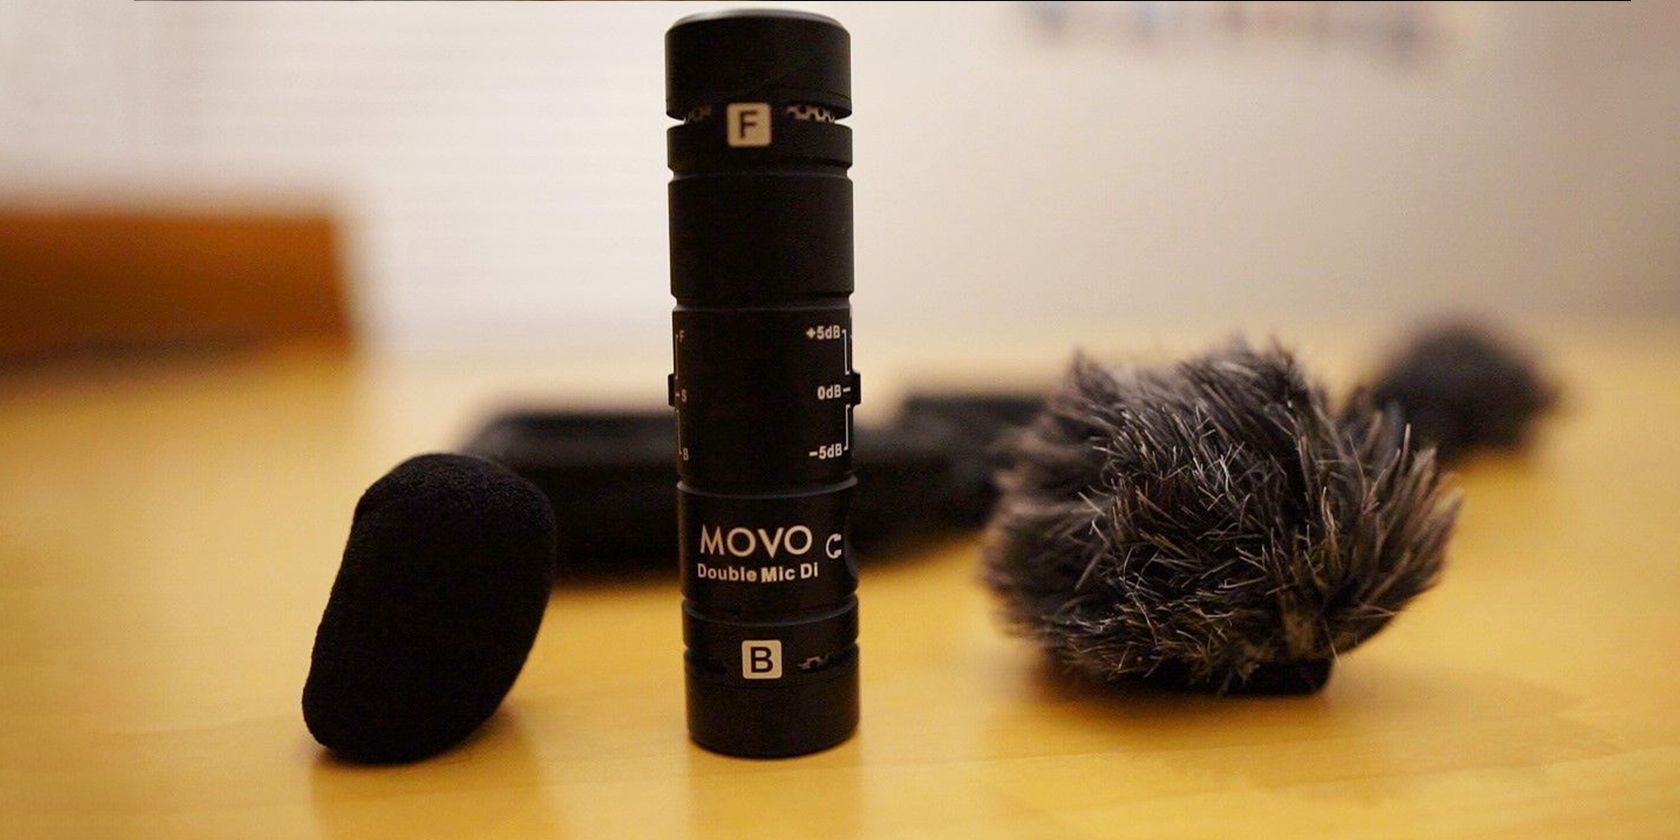 movo double mic di featured